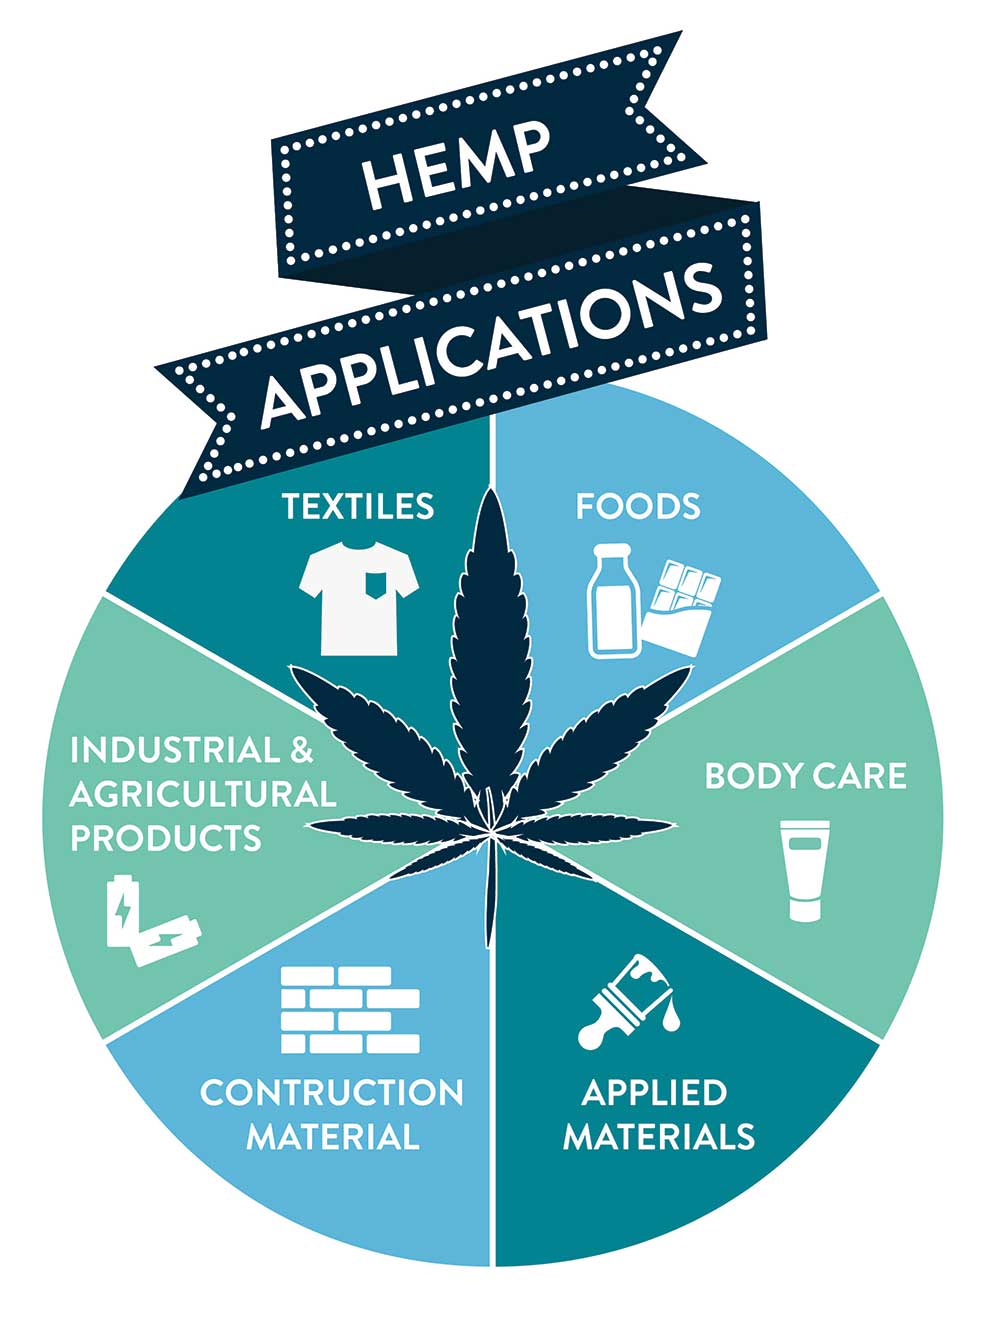 Is This Finally The Big Moment For Hemp?